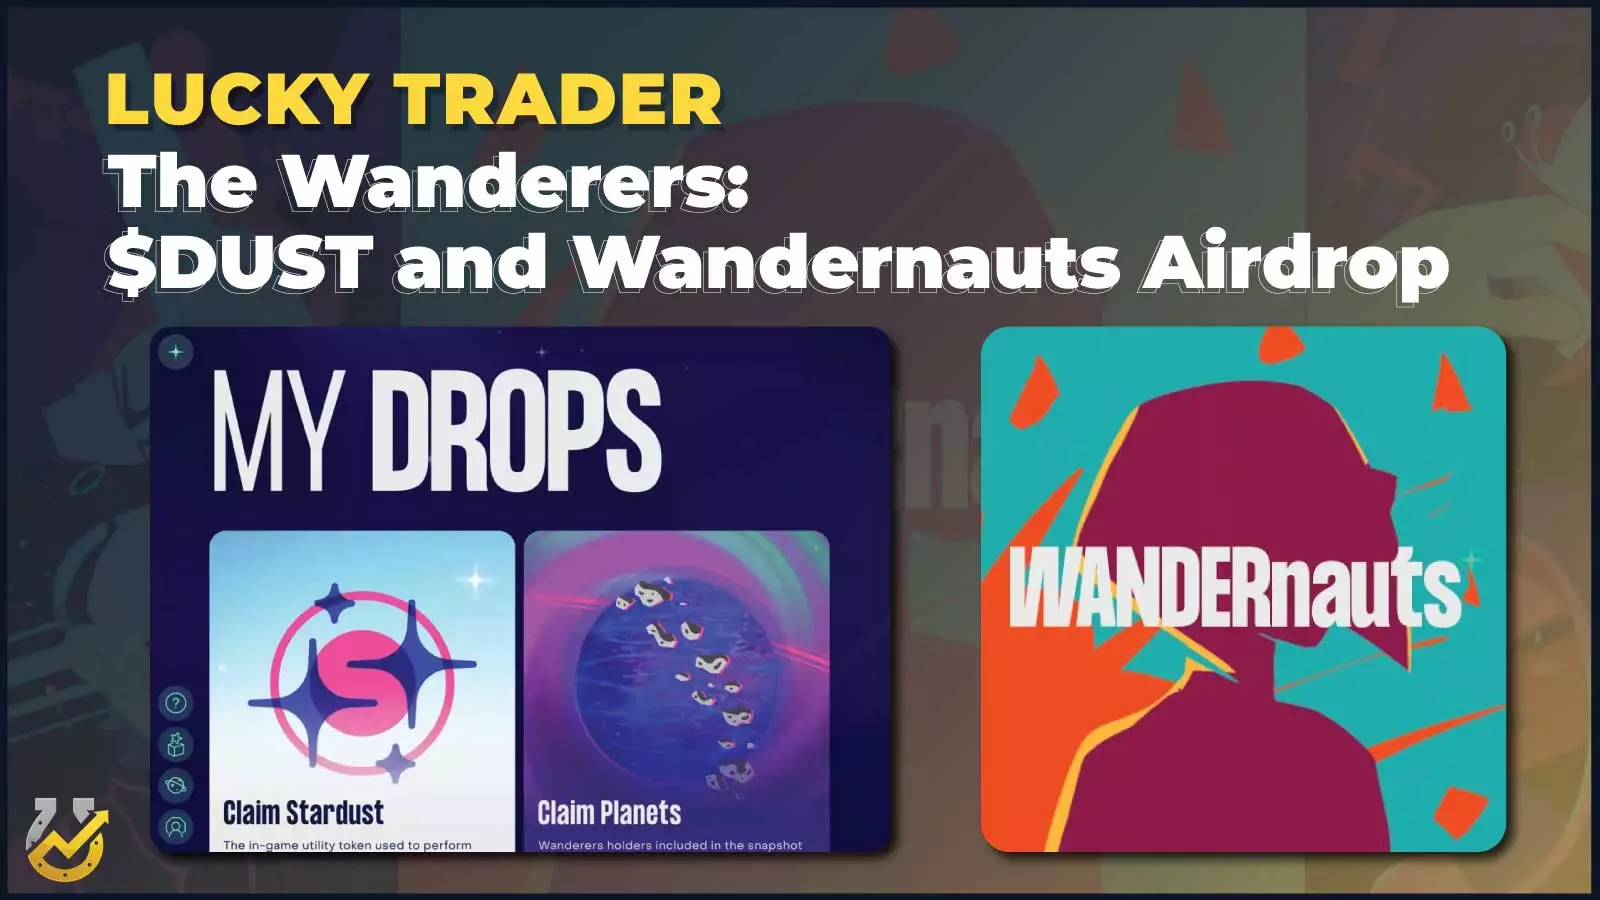 What's New With The Wanderers? $DUST and Wandernauts Airdrop